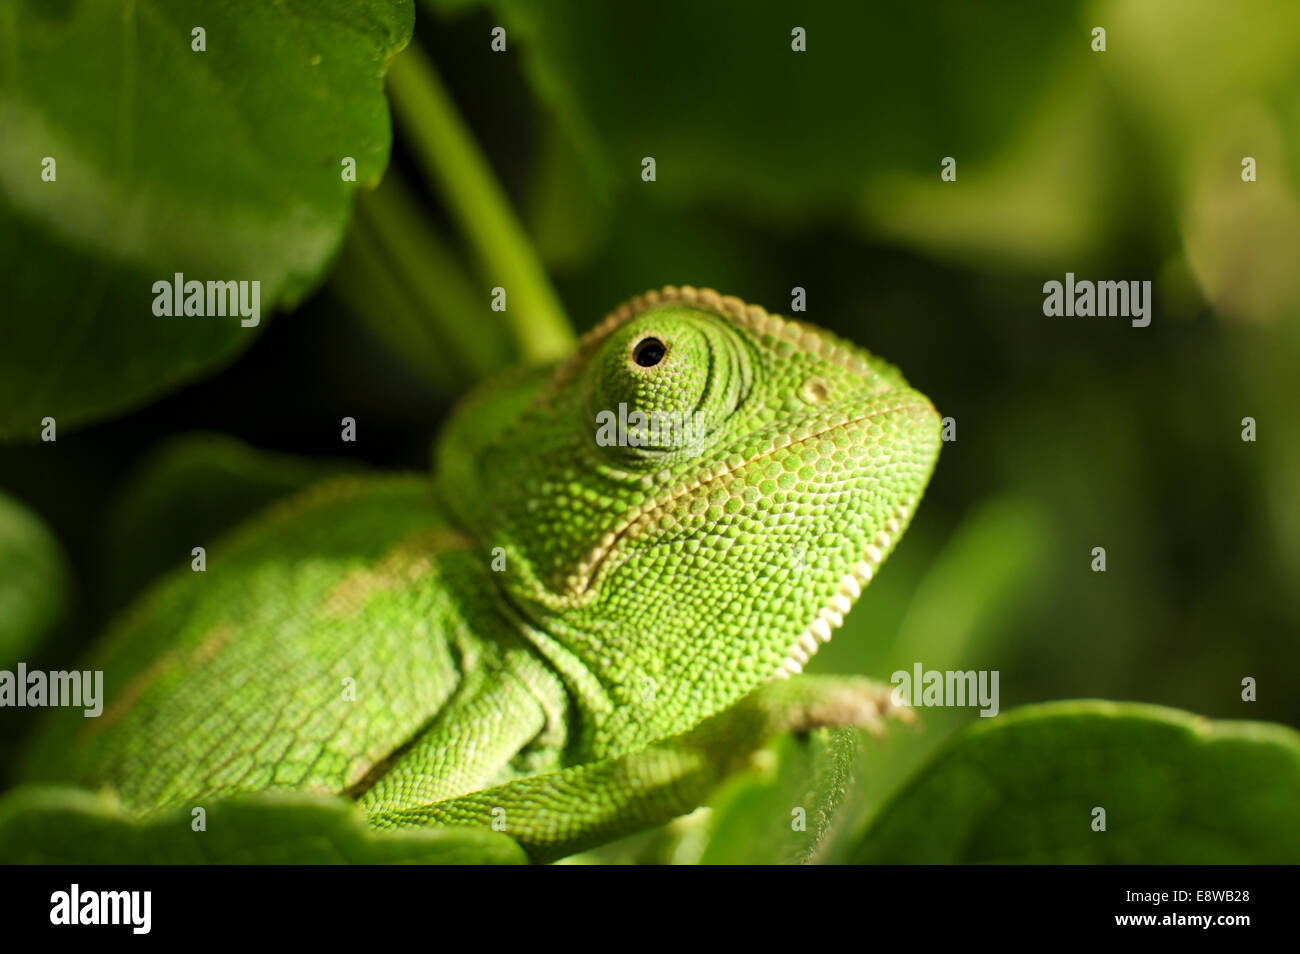 Common Chameleon (Chamaeleo chamaeleon), The common chameleon and its subspecies are found throughout much of North Africa and t Stock Photo